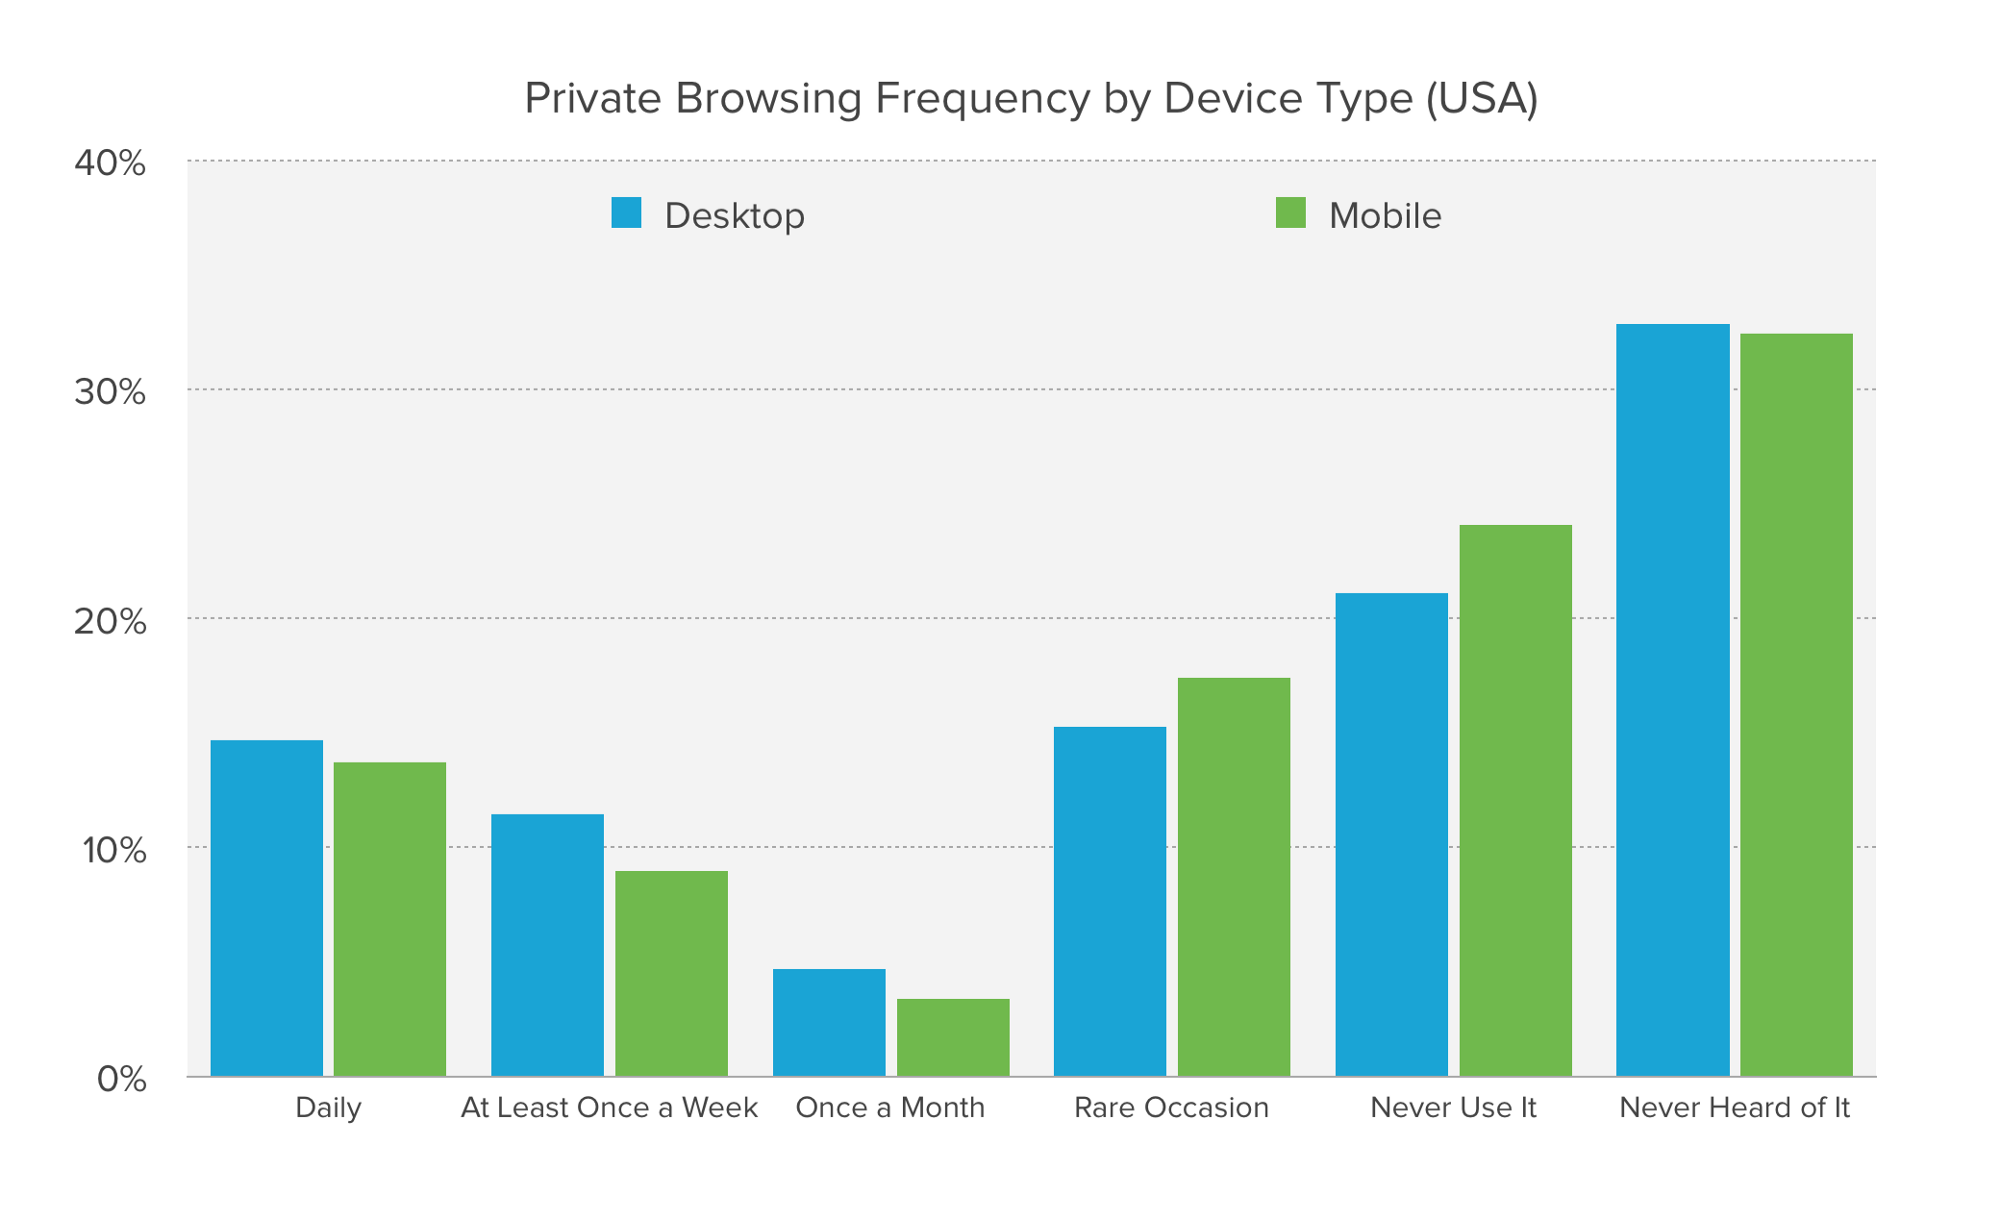 Chart showing private browsing frequency by device type.